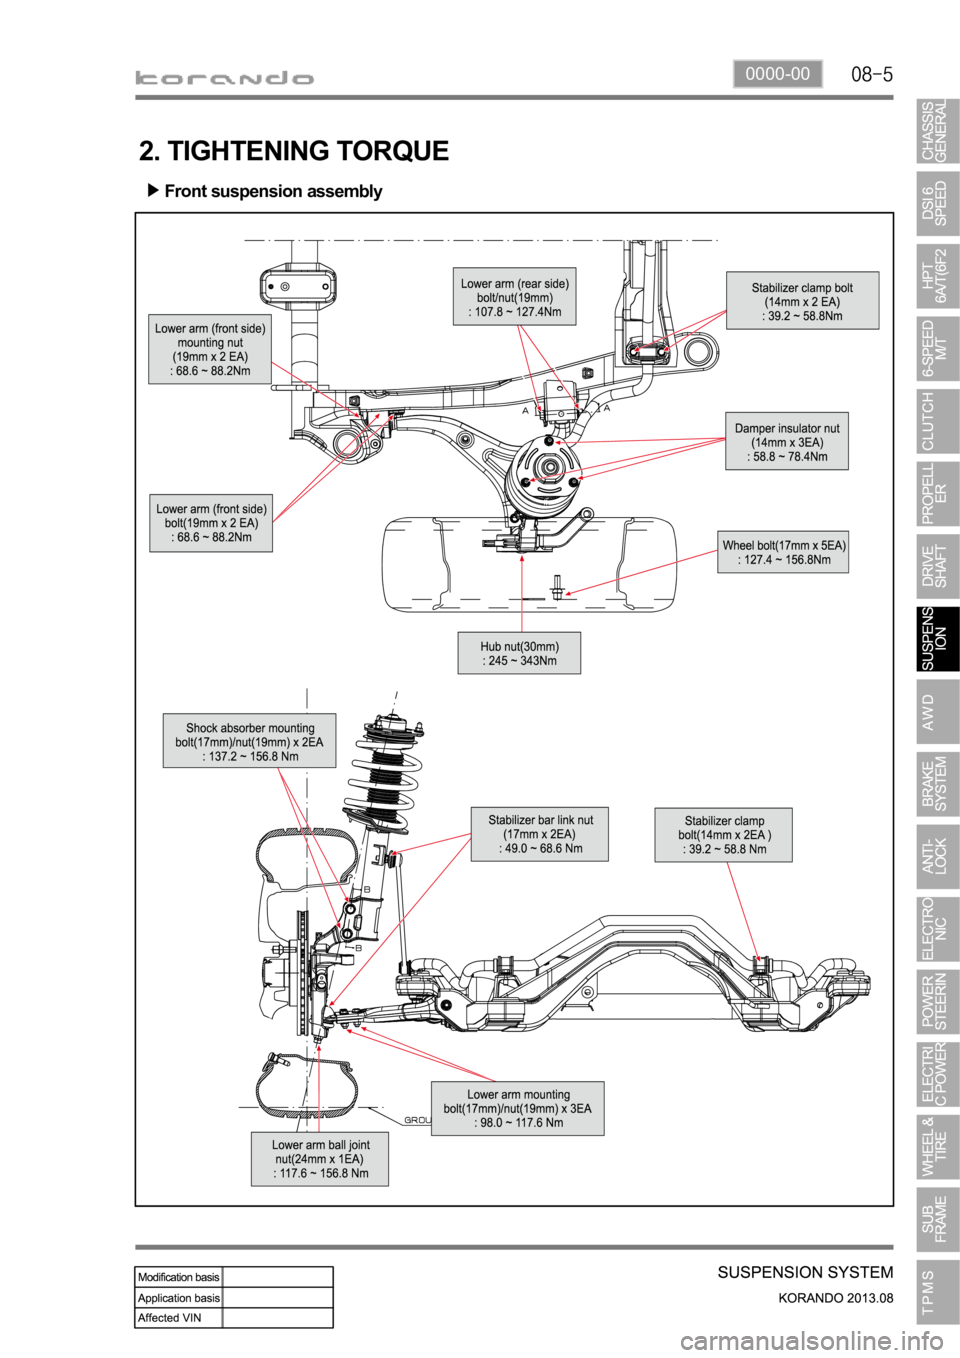 SSANGYONG KORANDO 2013  Service Manual 0000-00
2. TIGHTENING TORQUE
Front suspension assembly 